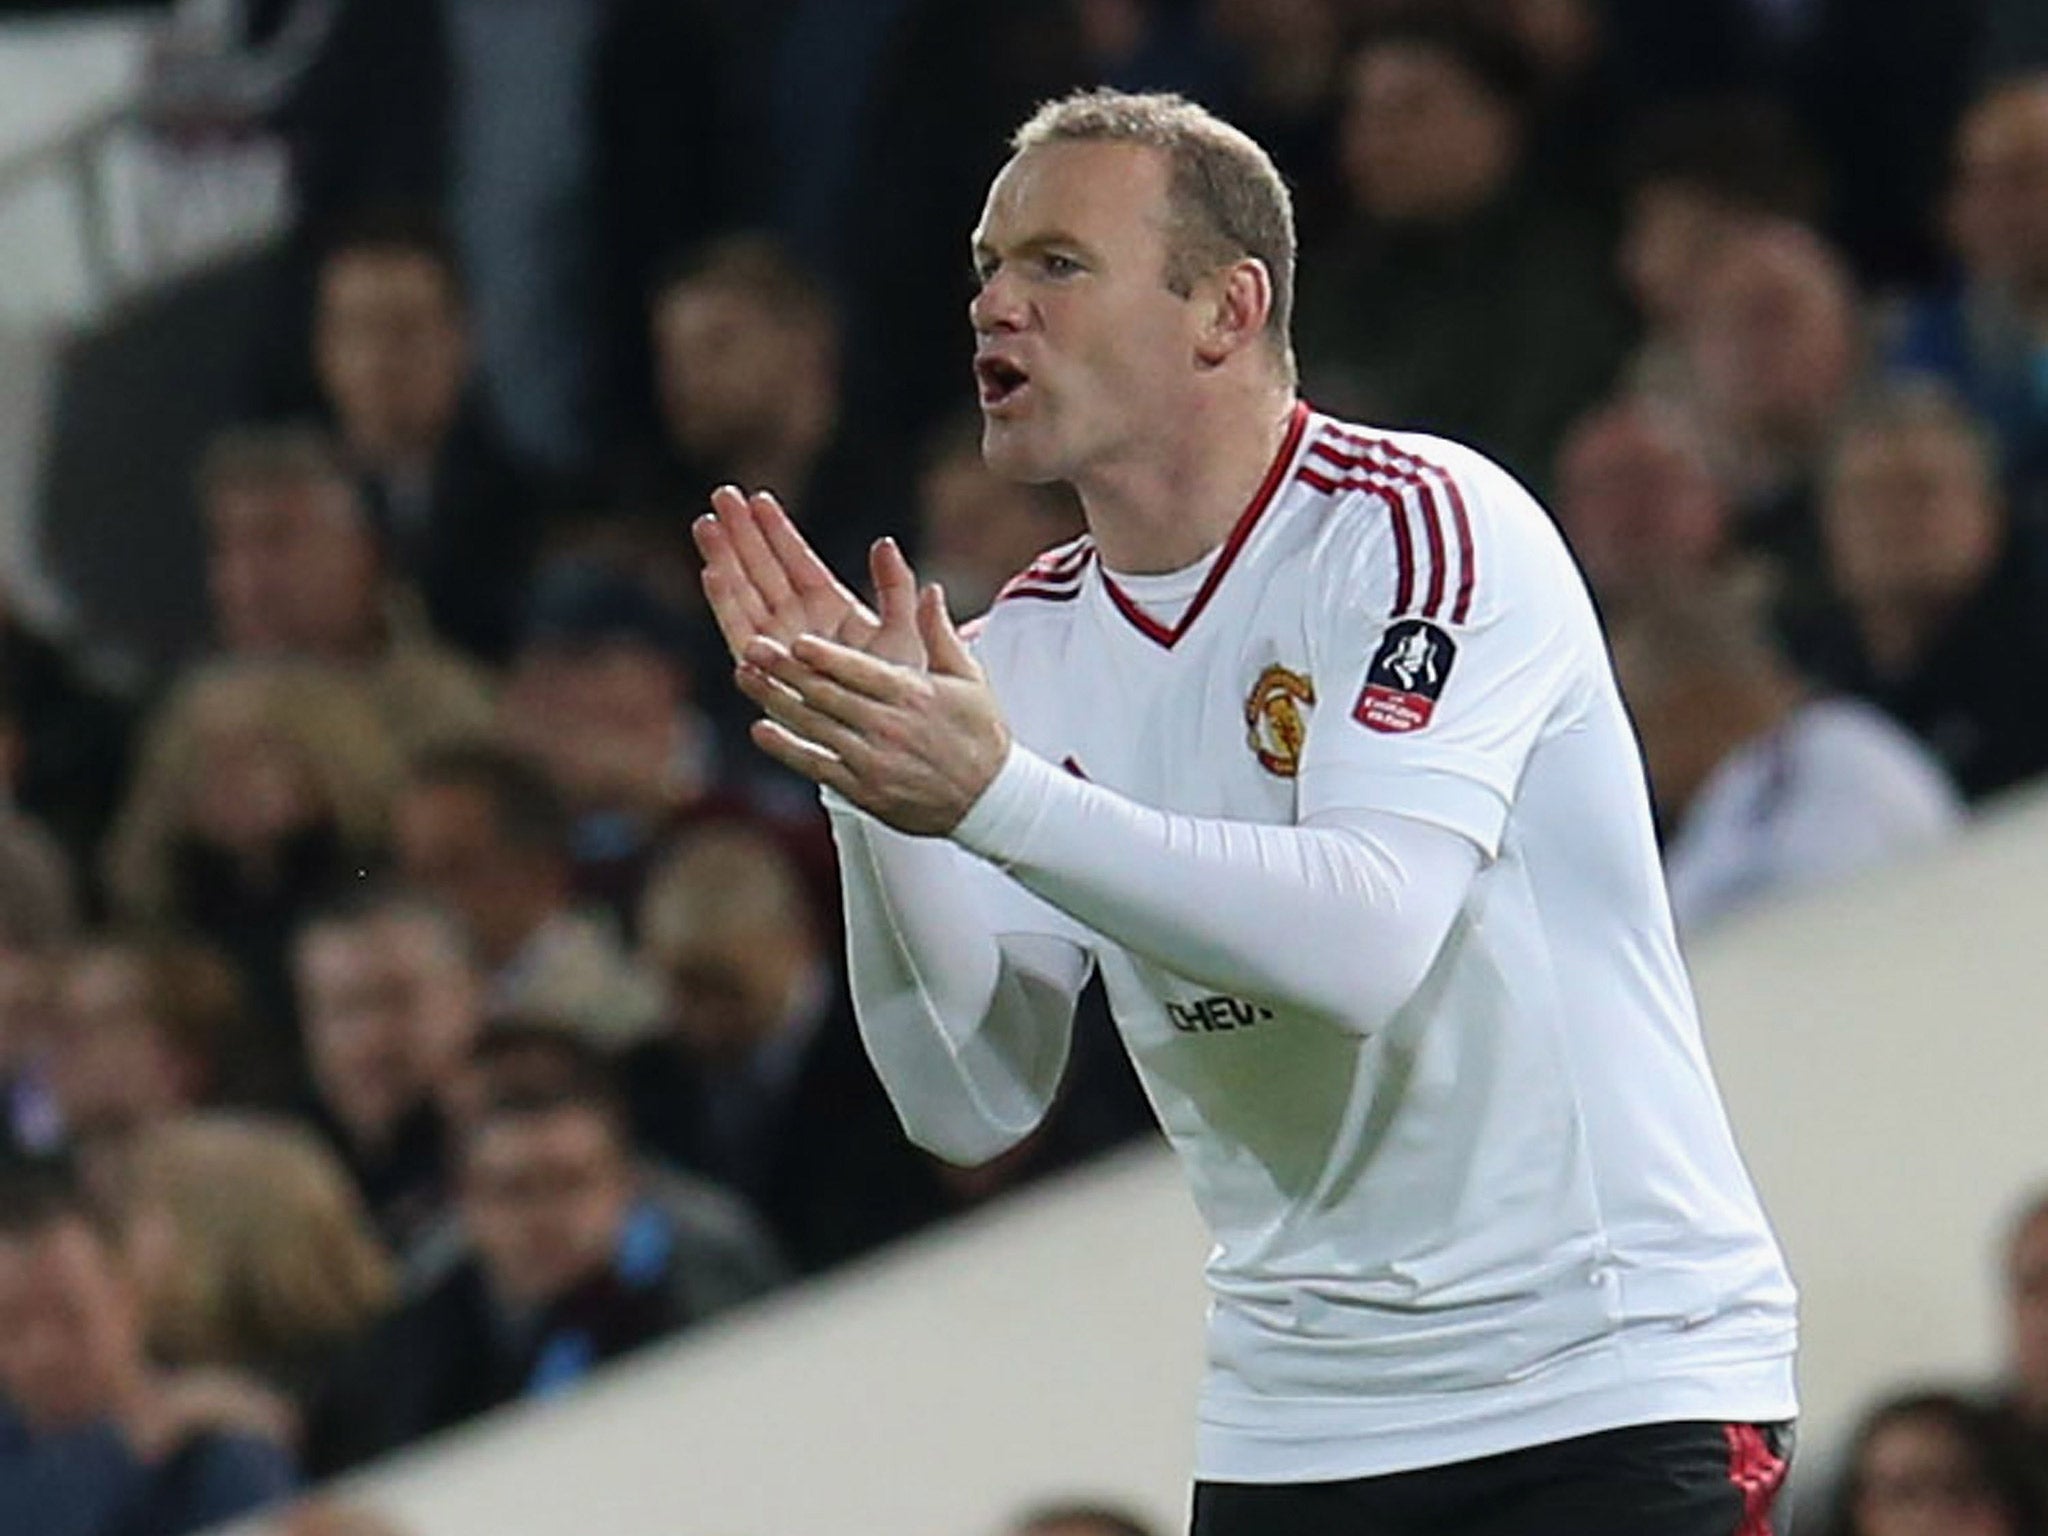 Wayne Rooney returned from injury for Manchester United on Wednesday